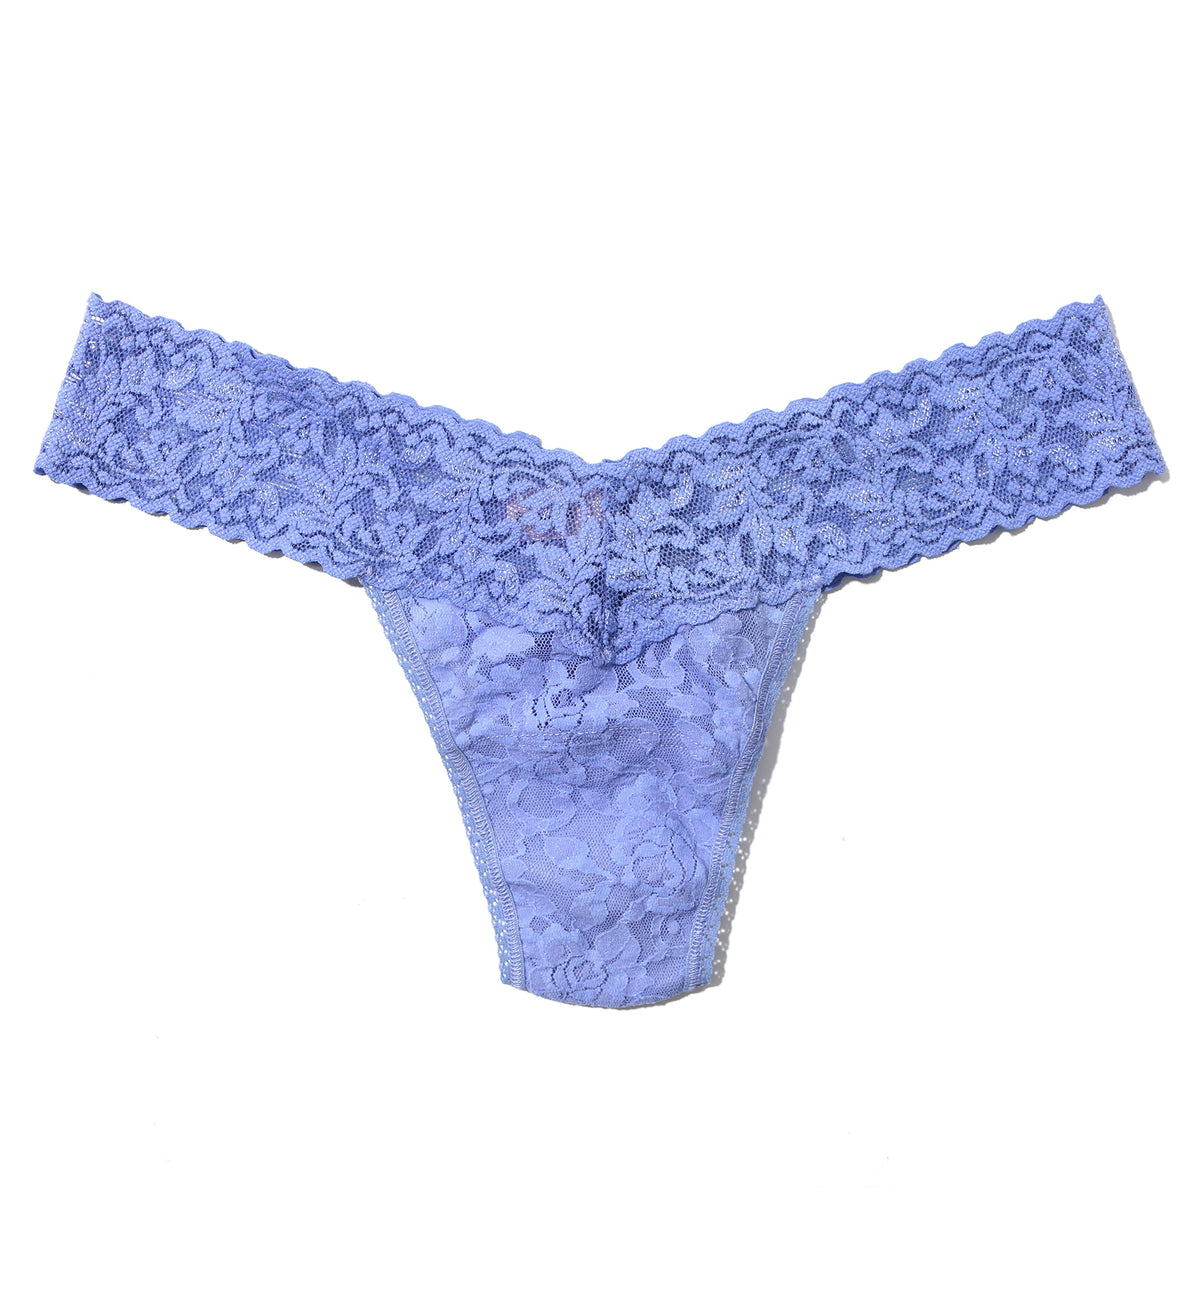 Hanky Panky Signature Lace Low Rise Thong (4911P),Cool Water Blue - Cool Water Blue,One Size